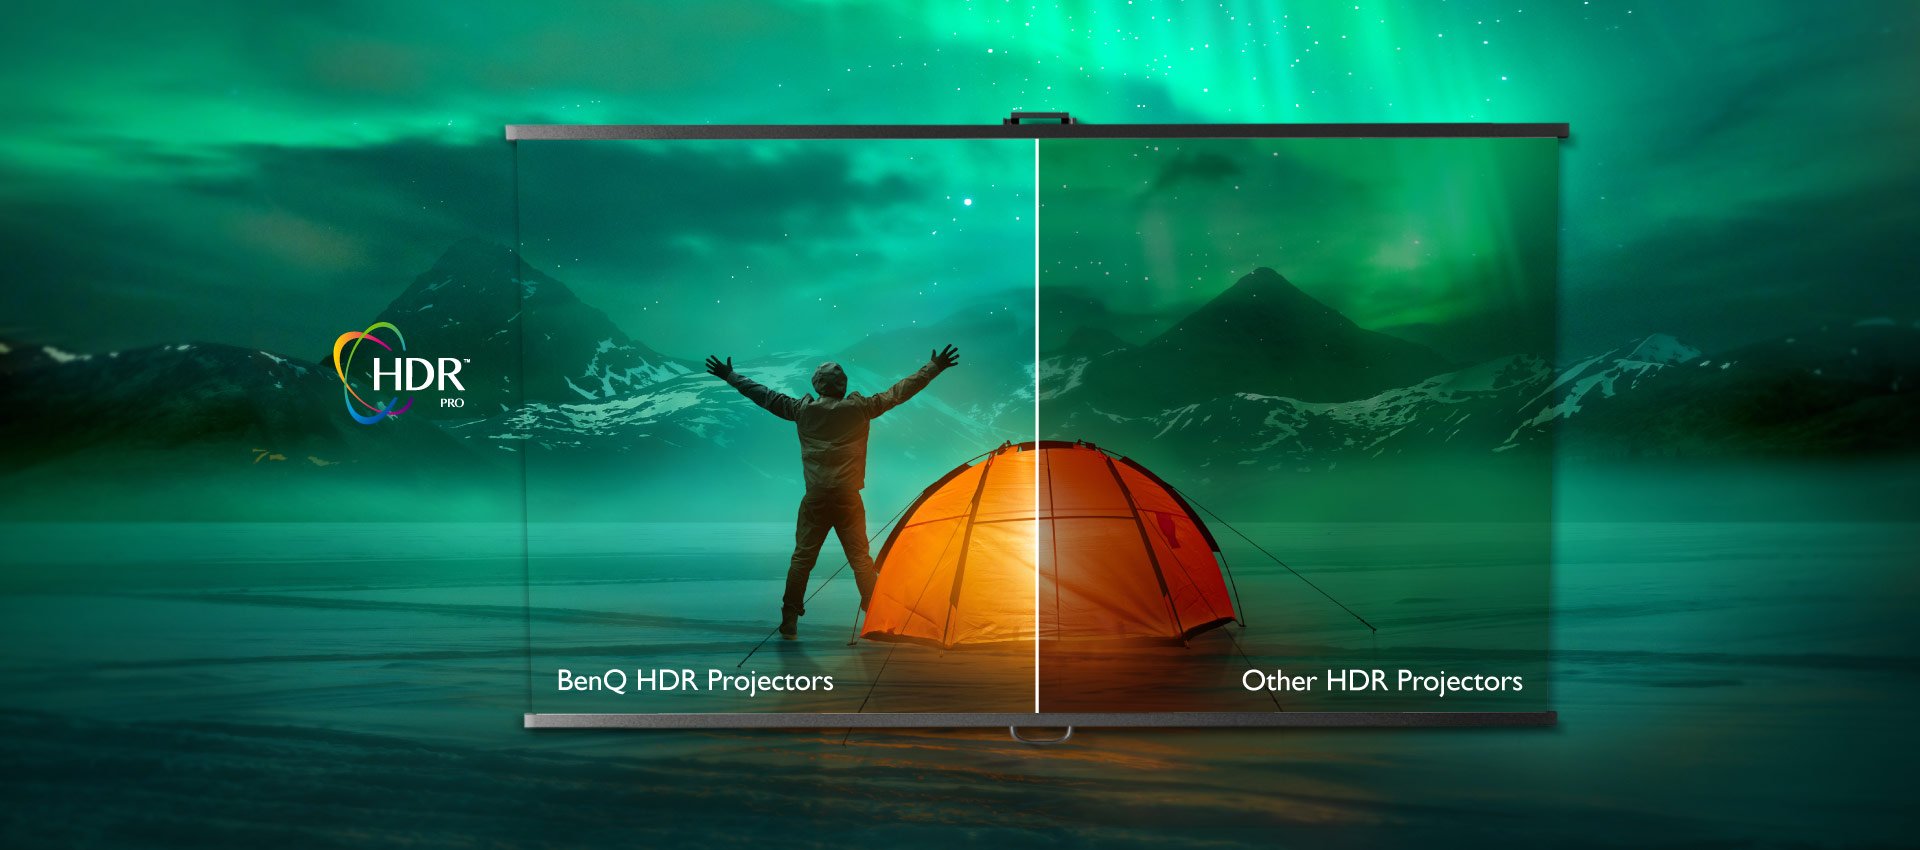 BenQ's 4K Home Projector Powered by Android TV w2700i offers greater brightness, contrast range, and image optimizationn